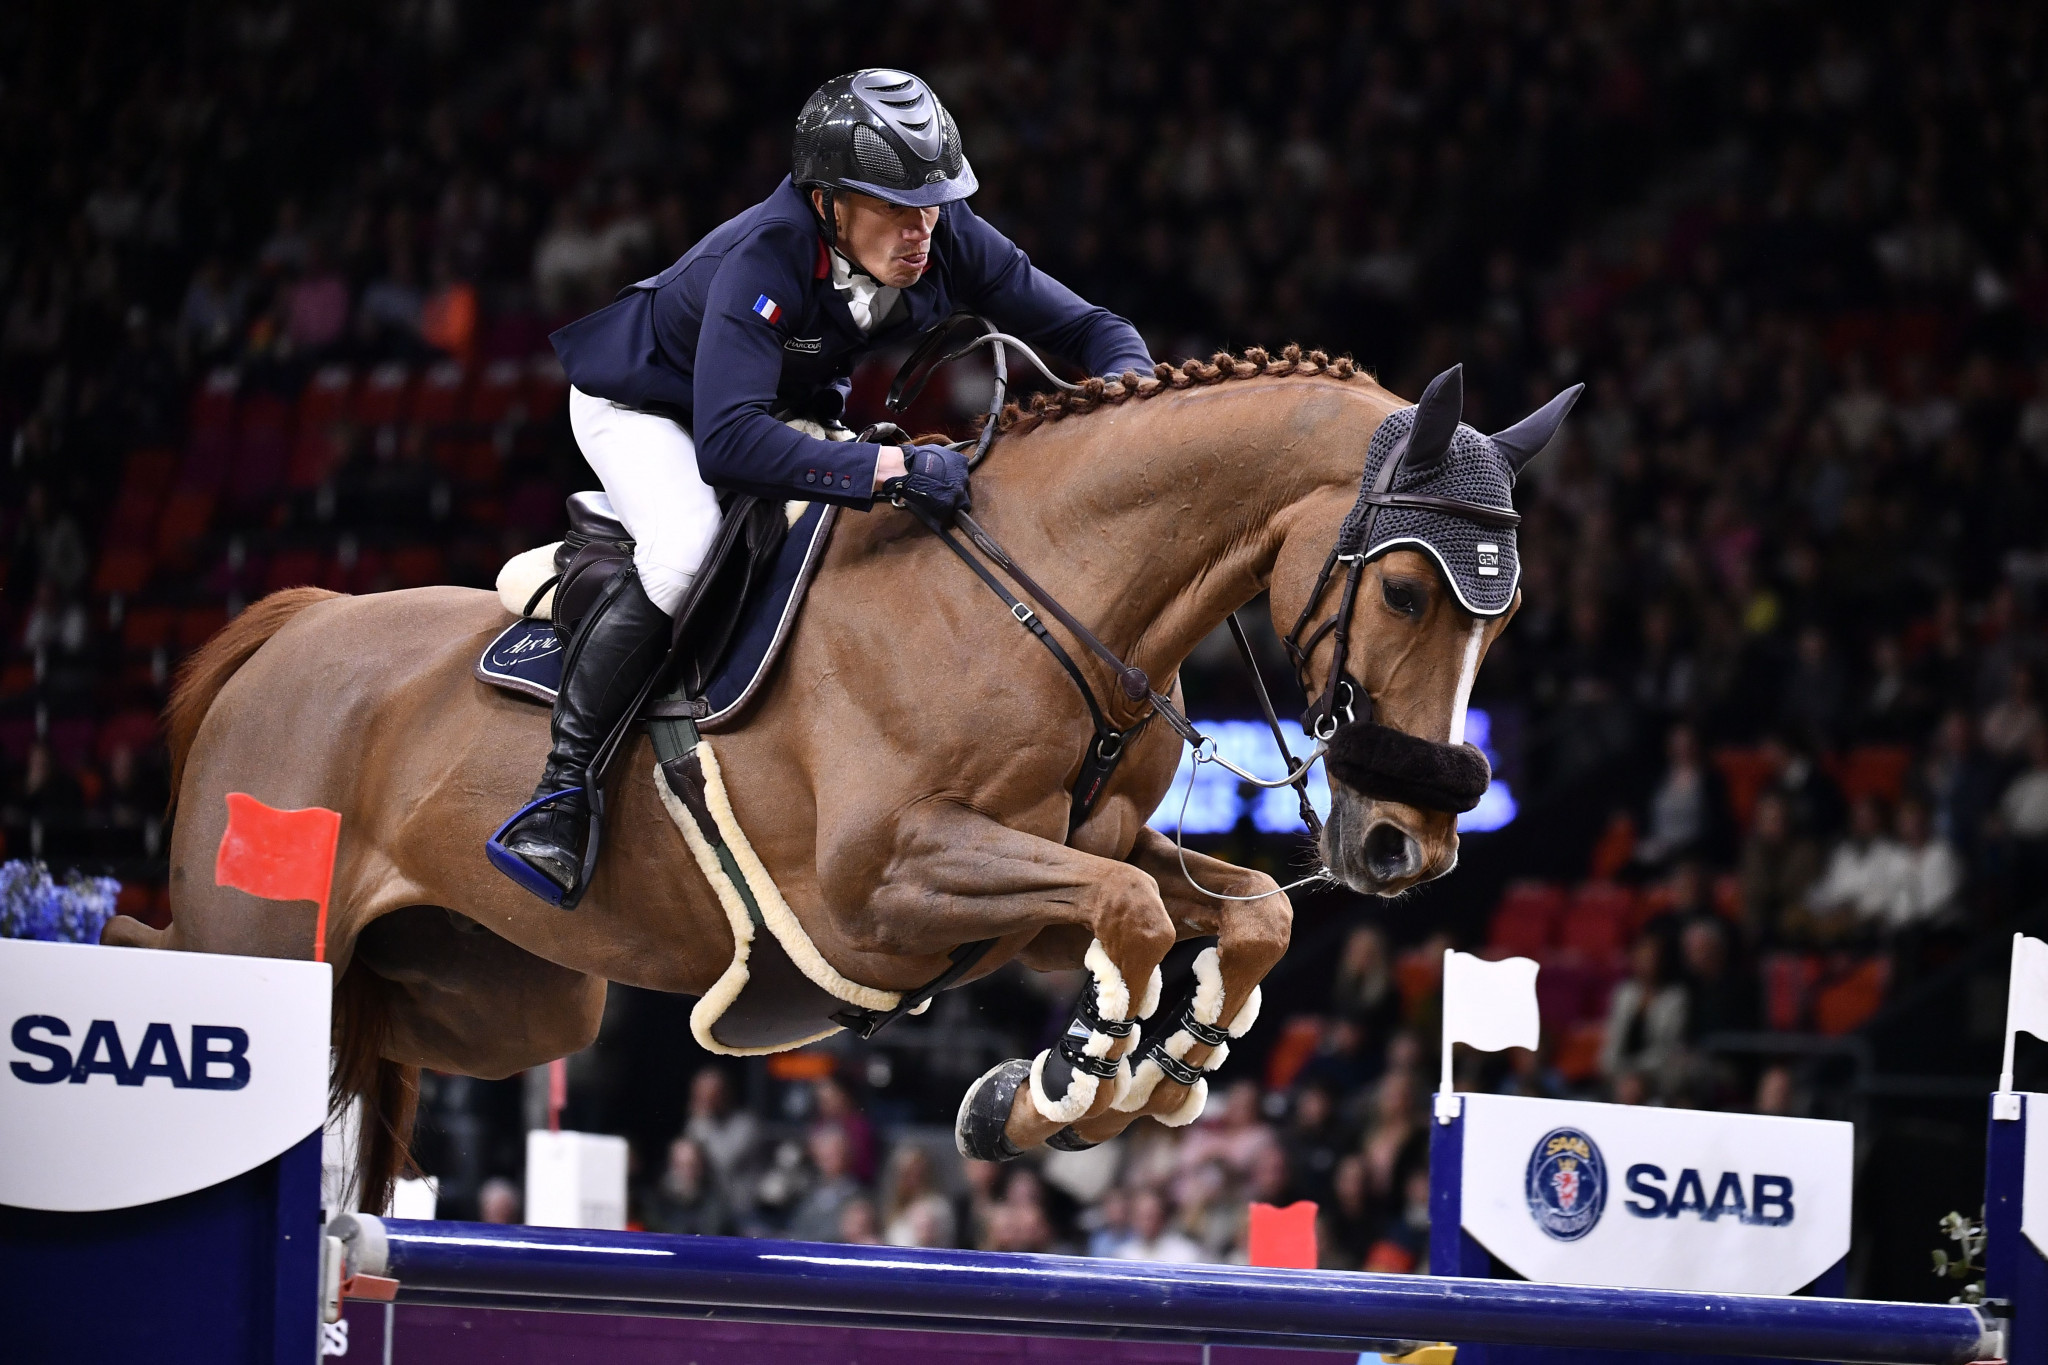 France's Olivier Robert came out on top in the opening jumping competition at the World Equestrian Festival in Aachen in Germany today ©Getty Images